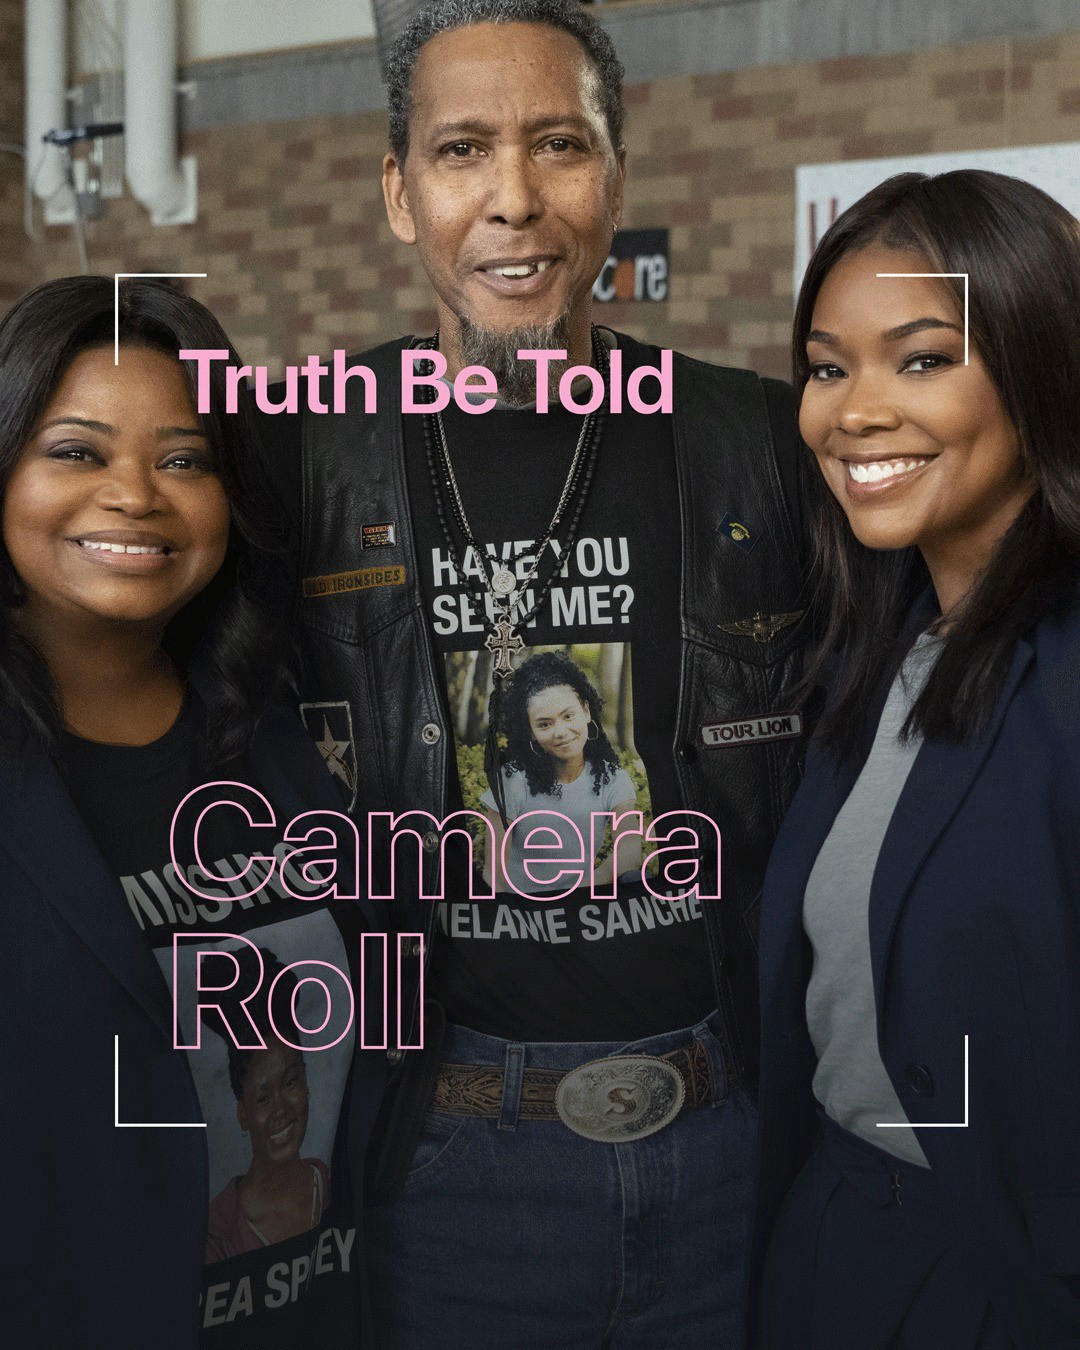 image  1 The cast and crew of #TruthBeTold are just like family, with some friendships going back decades bef